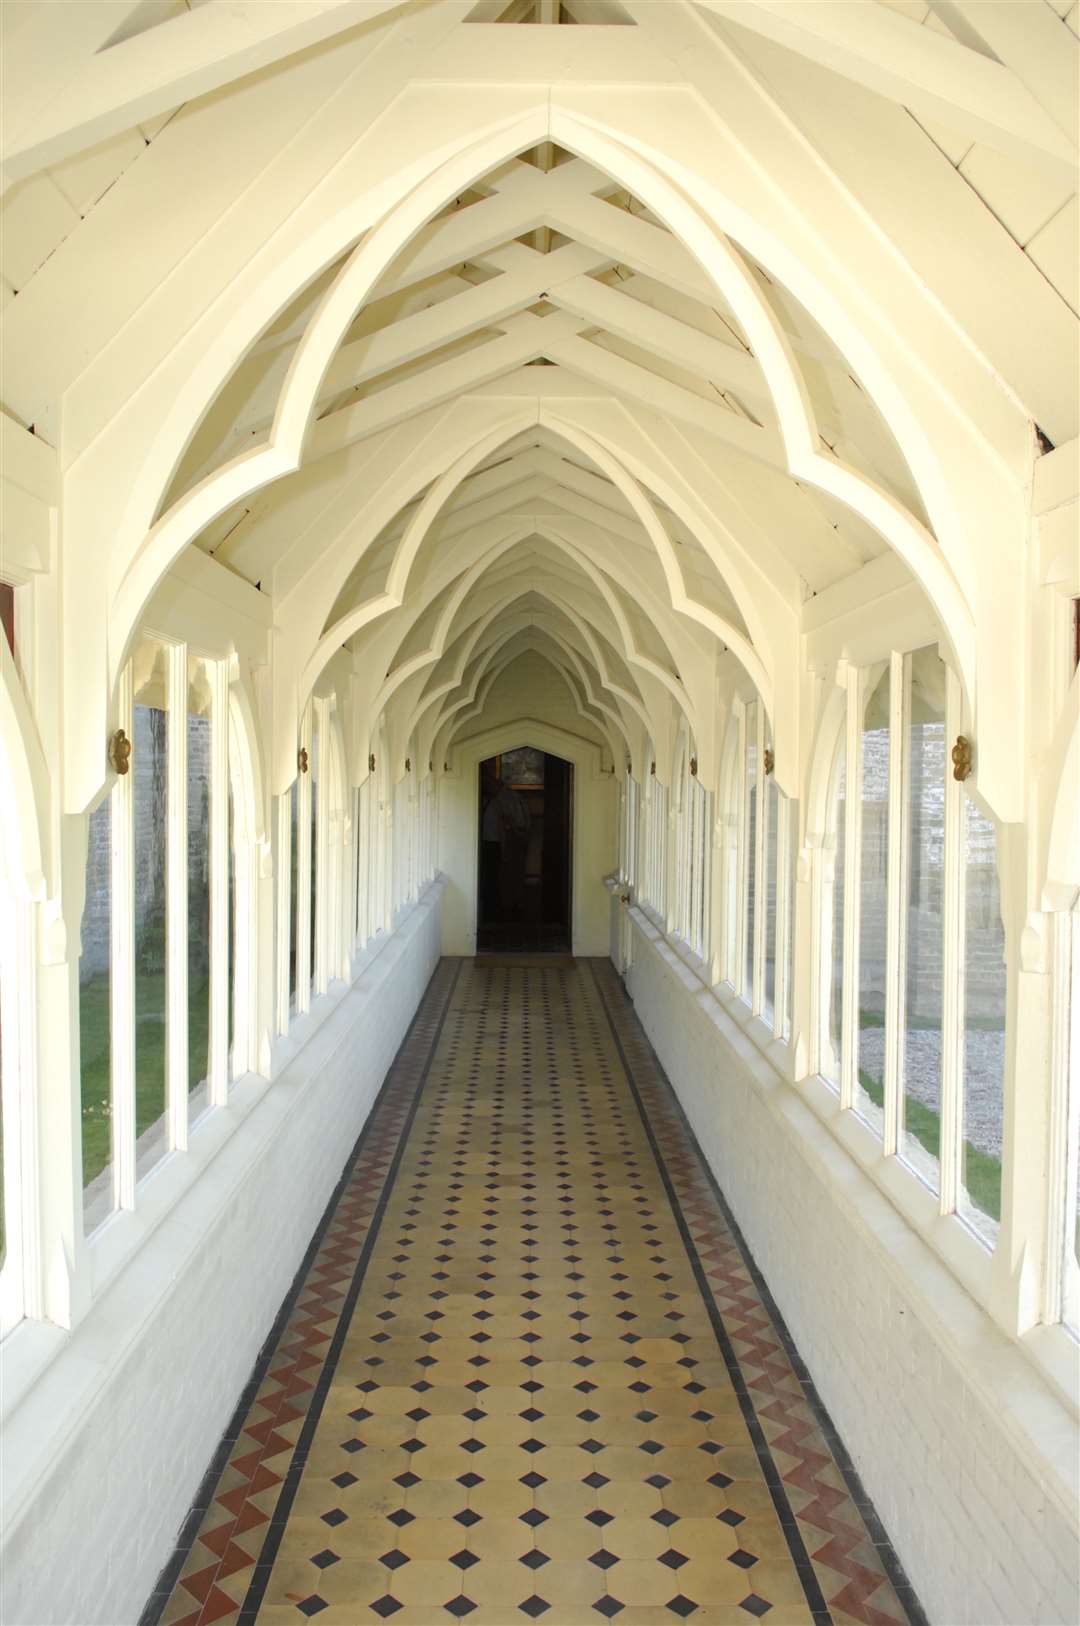 The covered walkway designed by Pugin at The Grange, Ramsgate. Picture: Martin Apps